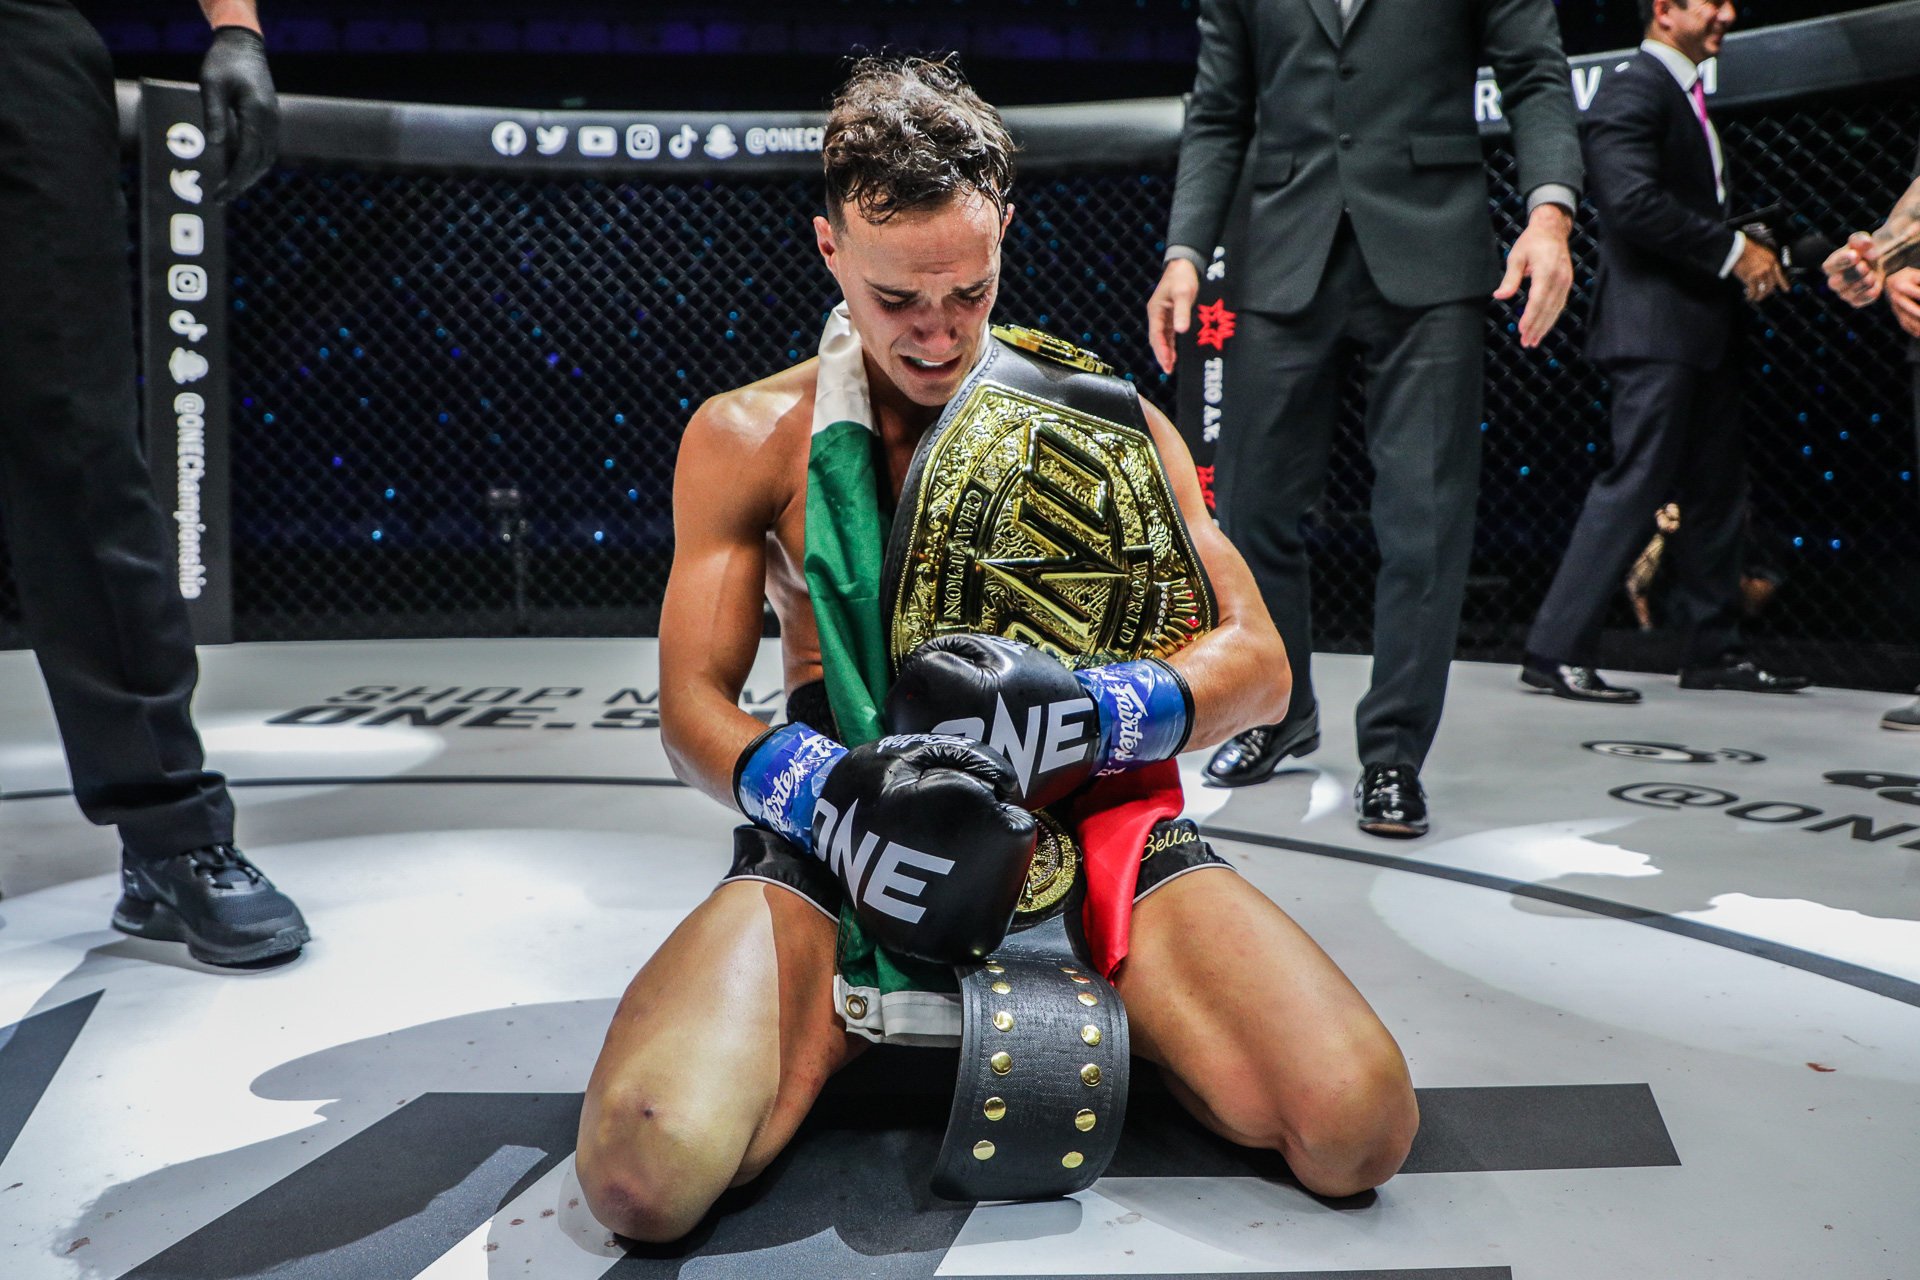 Jonathan Di Bella was due to defend his title for a second time in Bangkok. Photo: ONE Championship